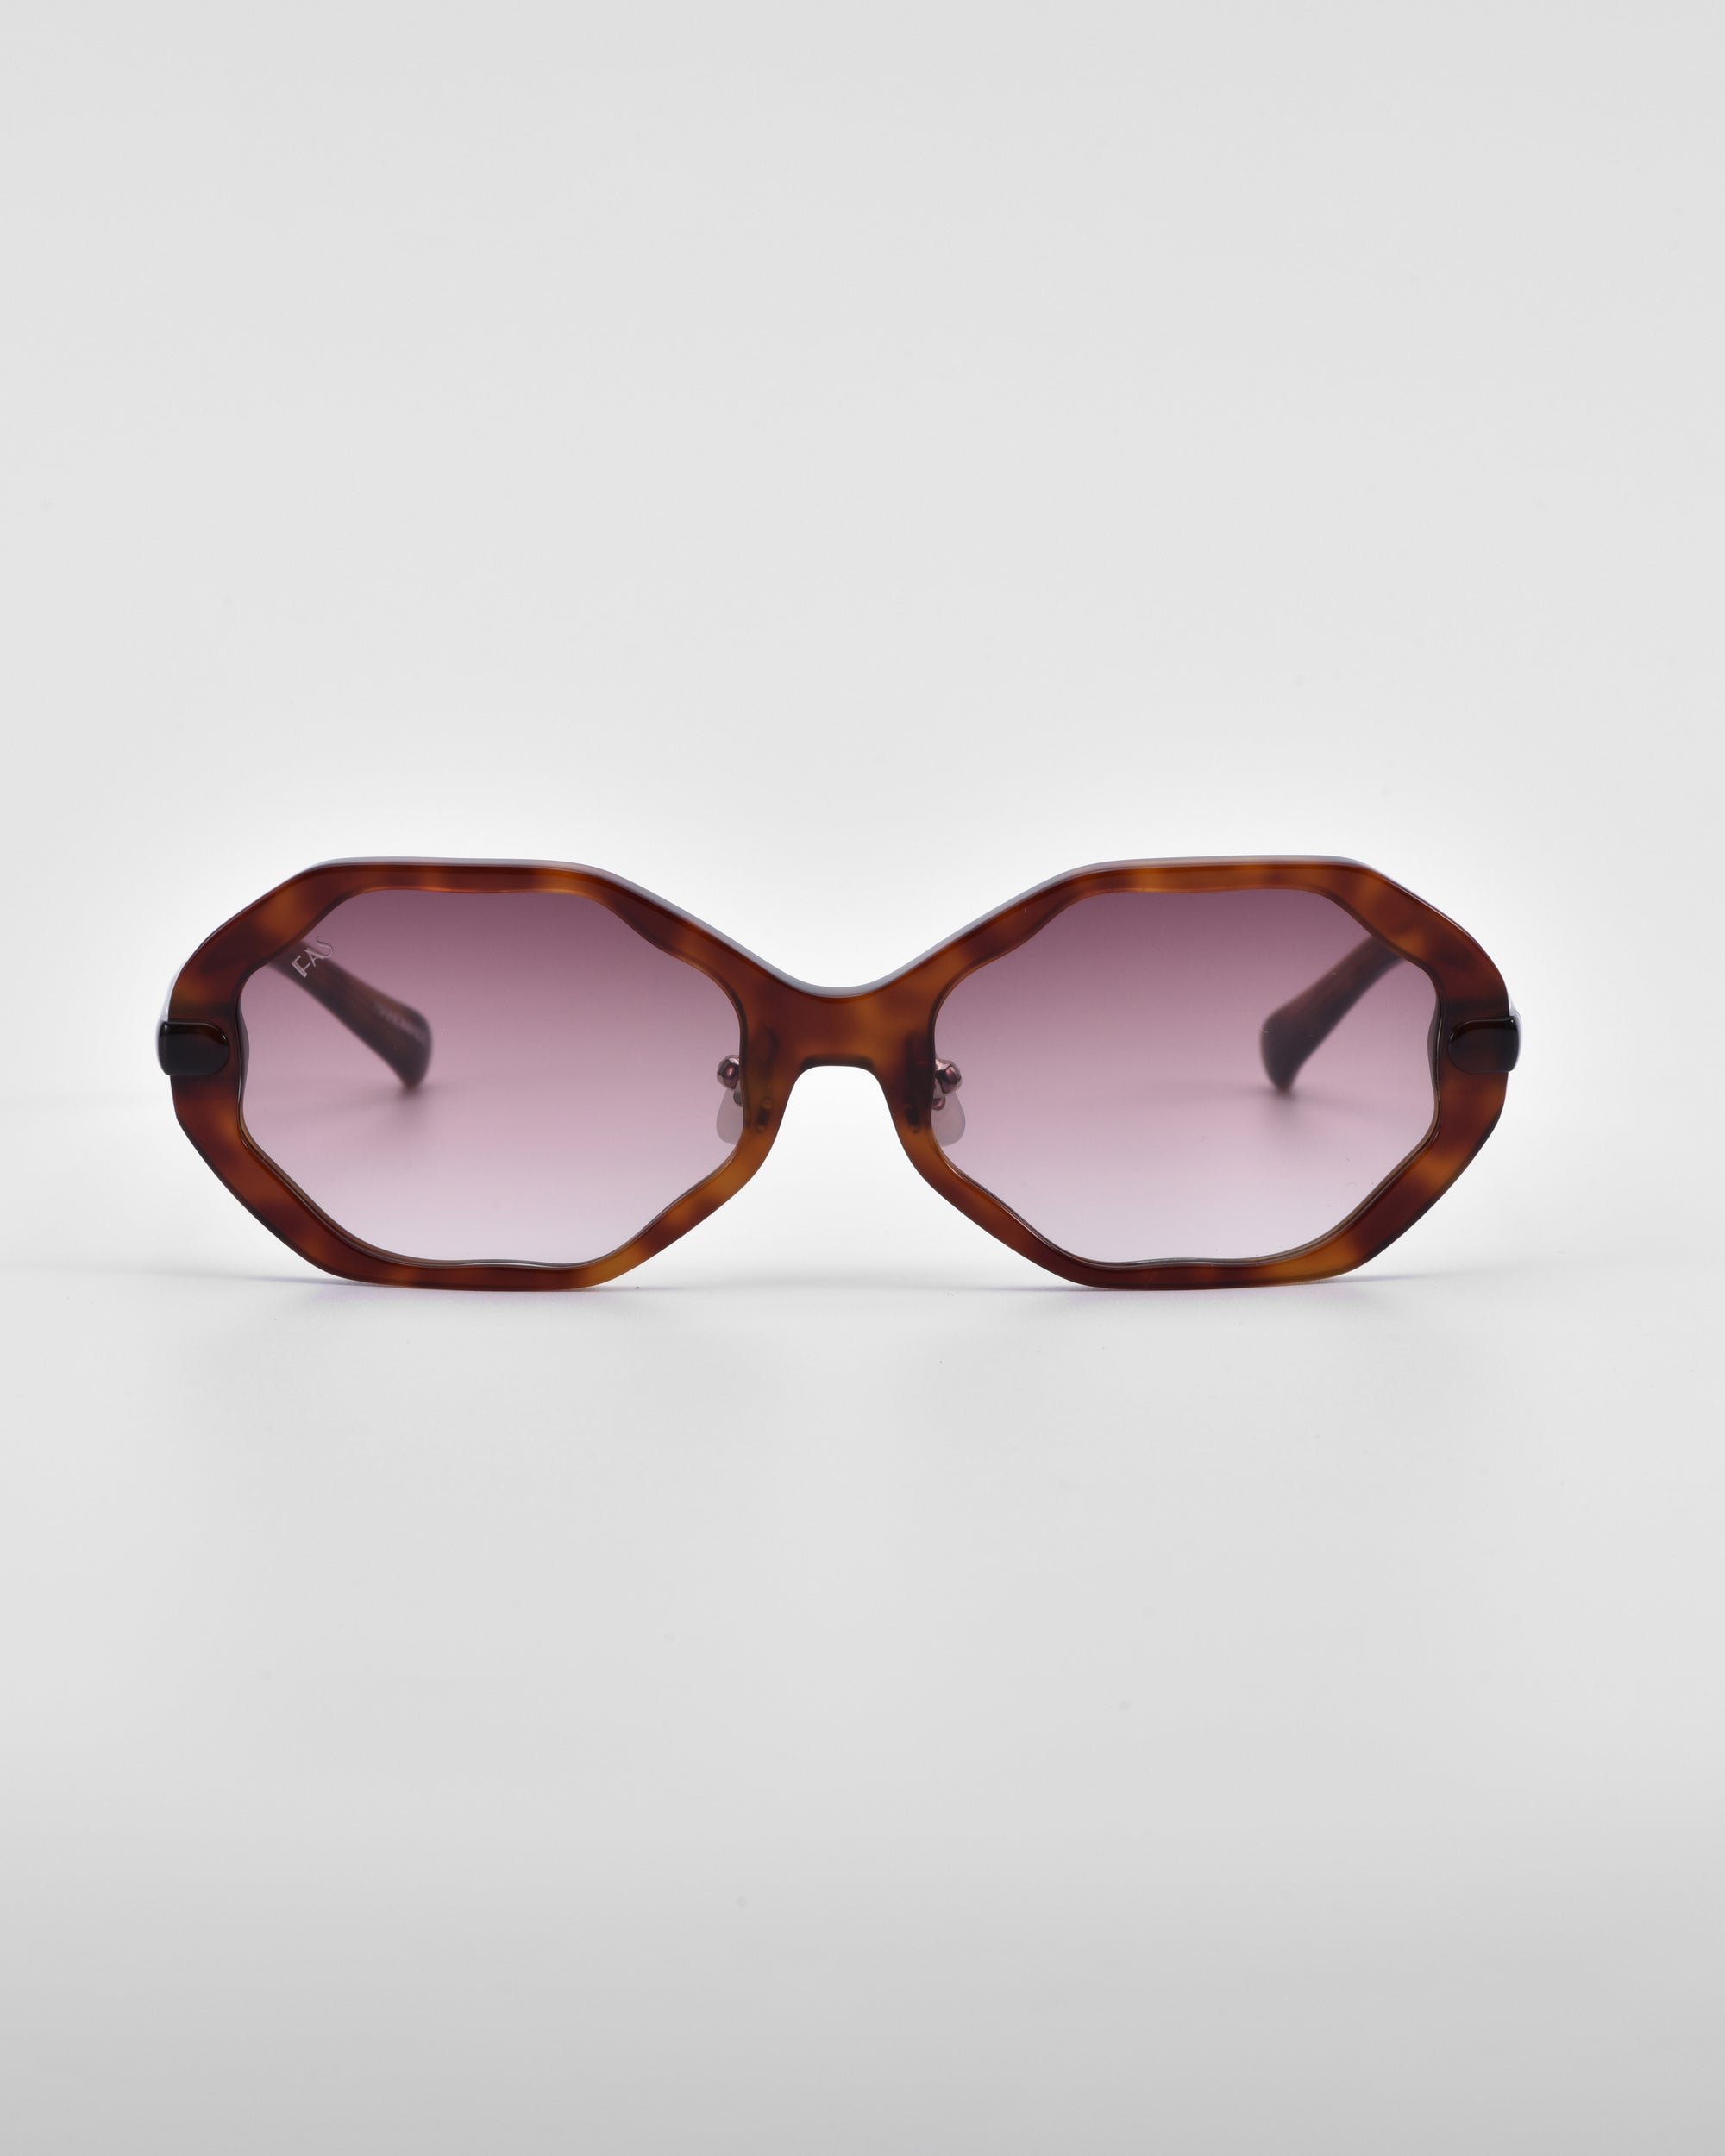 Front view of a pair of Lotus sunglasses by For Art&#39;s Sake® with an angular silhouette, featuring tortoiseshell frames and pink-tinted lenses, complemented by jade-stone nose pads. The sunglasses are placed on a plain white background.